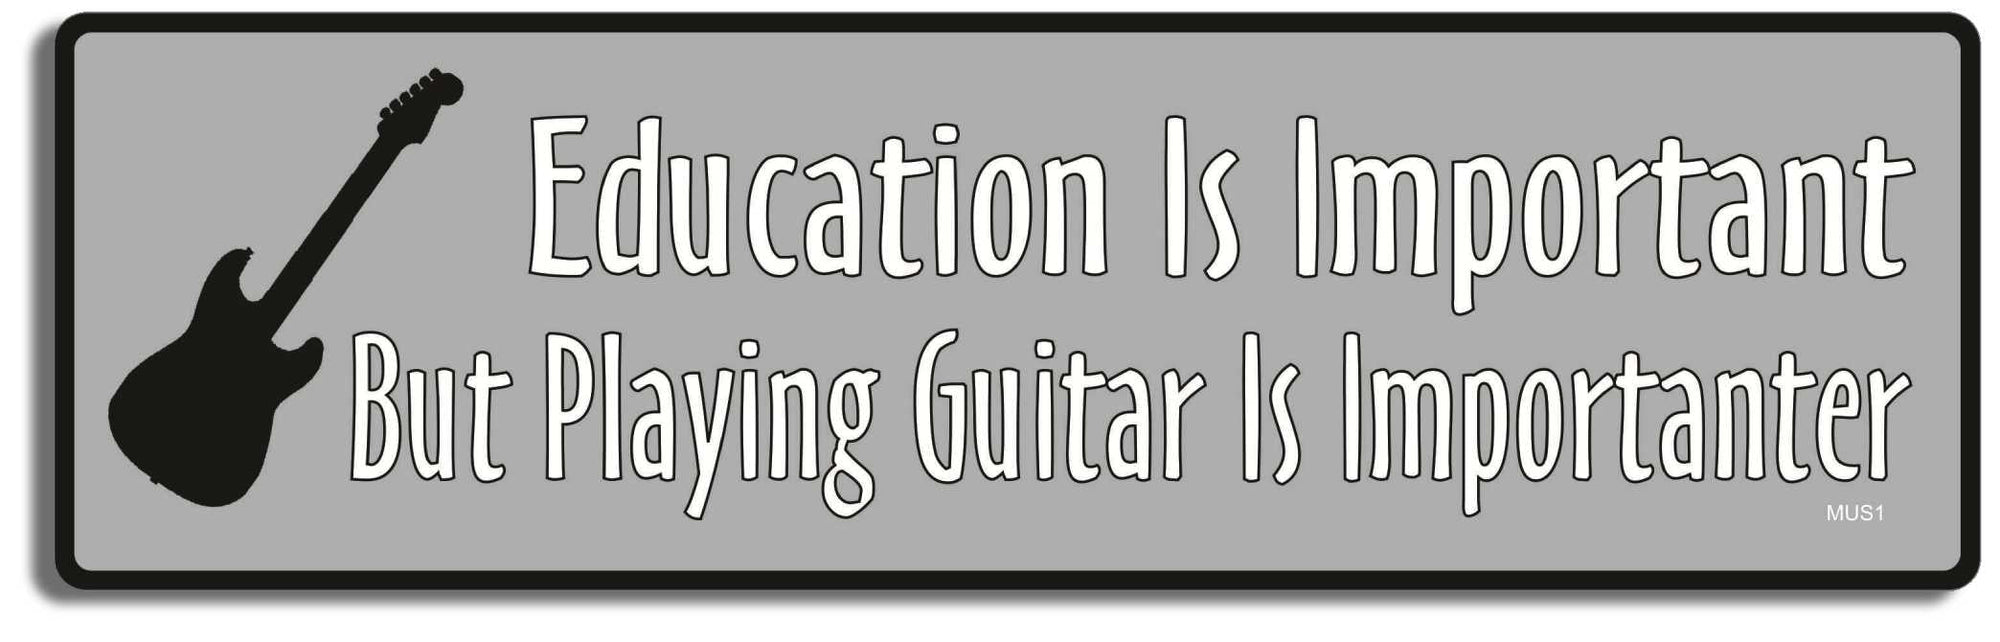 Education Is Important But Playing Guitar Is Importanter - 3" x 10" Bumper Sticker--Car Magnet- -  Decal funny Bumper Sticker Car Magnet Education Is Important But Playing-  Decal for carsFun, Music